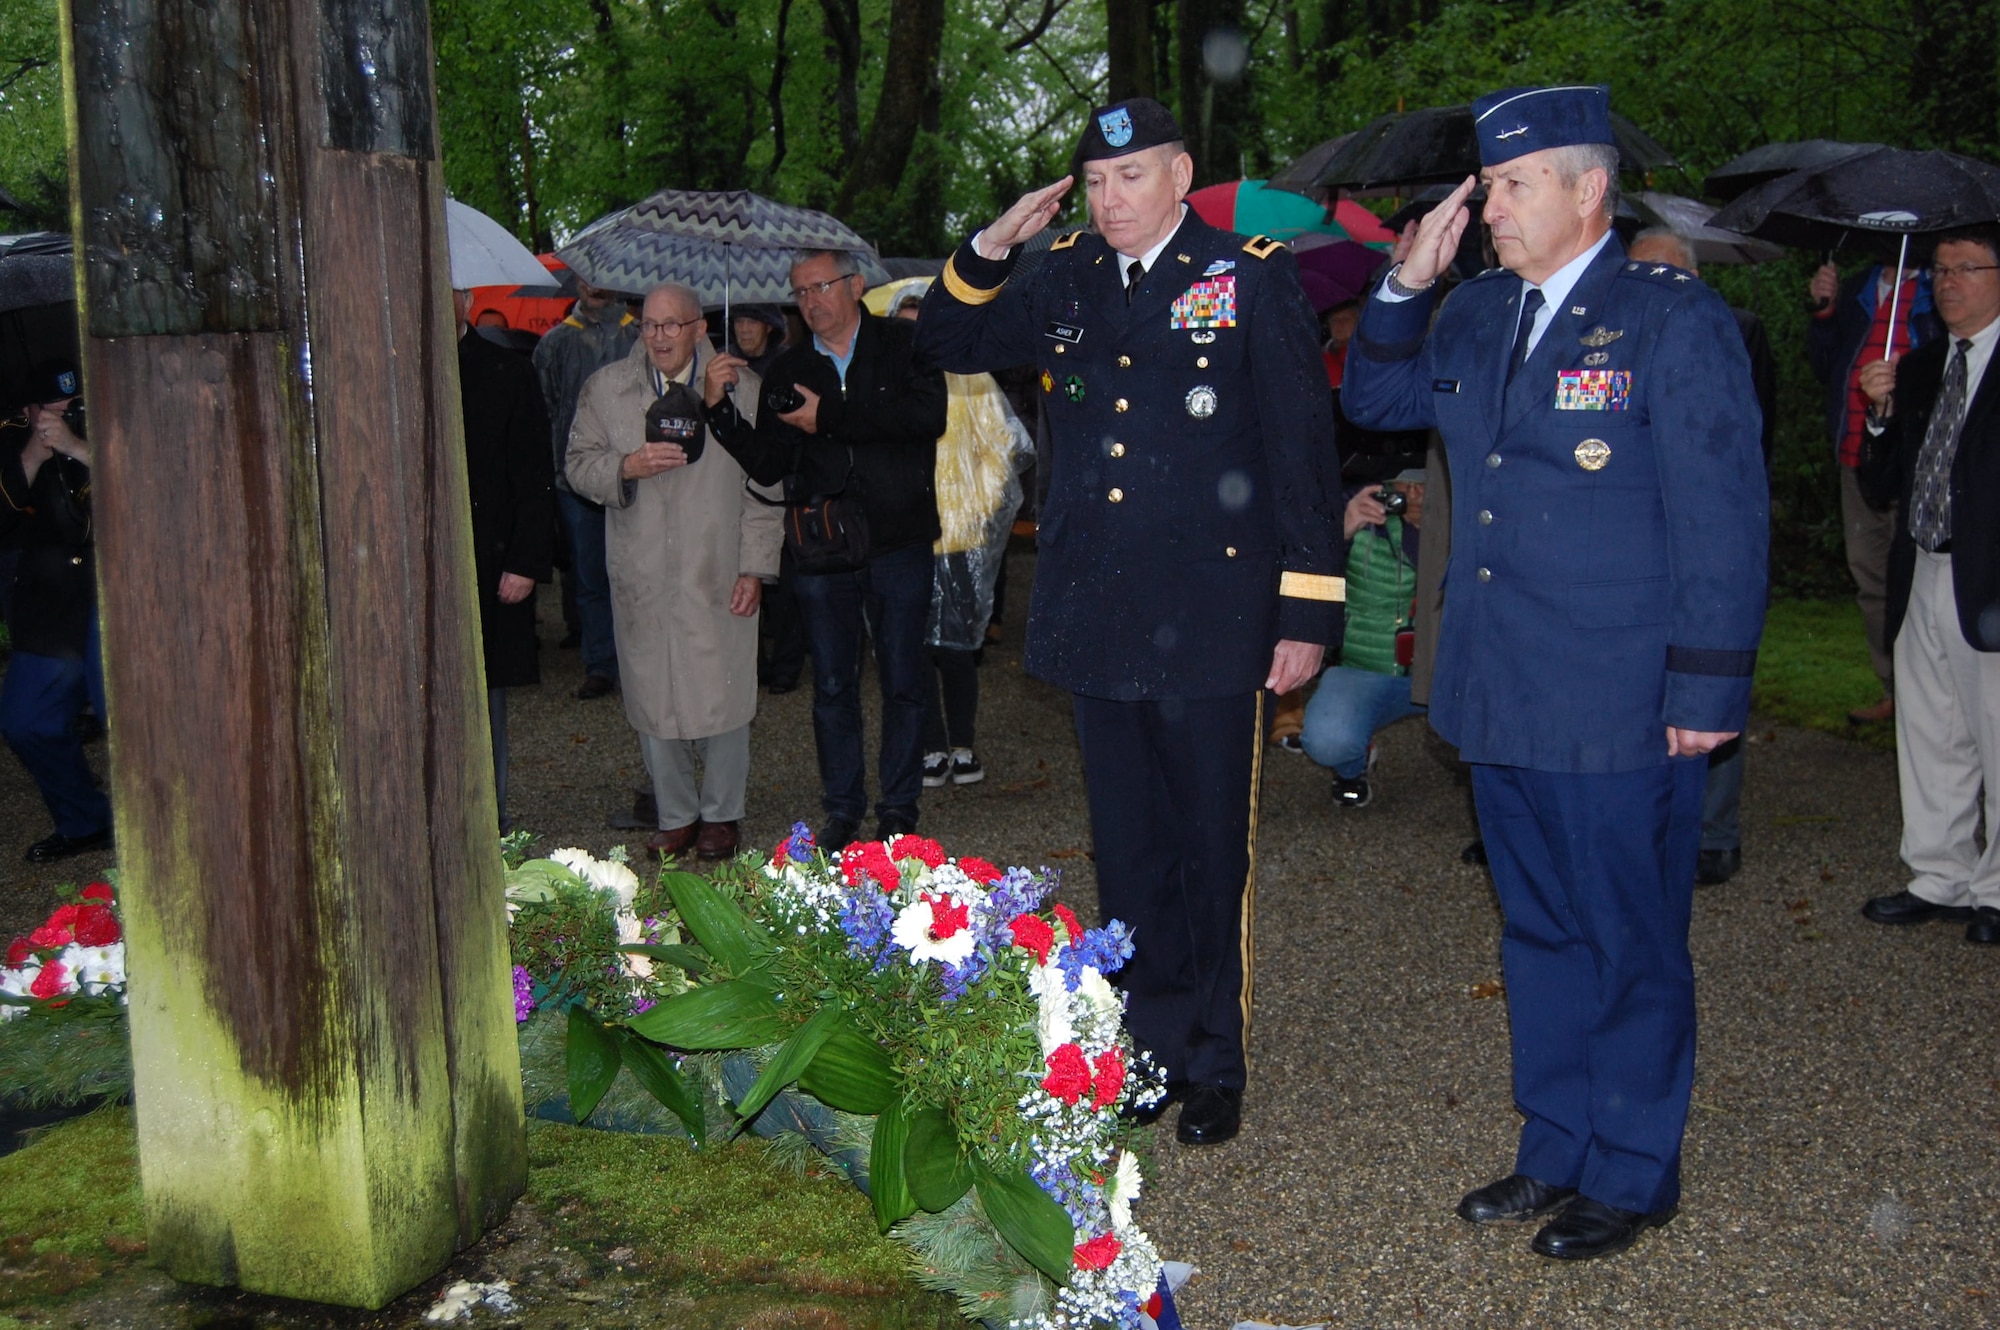 Maj. Gen. Robbie Asher, the Adjutant General of Oklahoma, and Maj. Gen. H. Michael Edwards, the Adjutant General of Colorado, salute in reverence after laying a wreath in honor of the several thousand prisoners who were buried in Leitenberg Cemetery after passing away in Dachau Concentration Camp. Members of the Colorado and Oklahoma National Guard participated in various ceremonies May 1-3, 2015, commemorating the 70th anniversary of the liberation of the concentration camp, Dachau. The 157th Infantry Regiment, one of the units that liberated the camp on April 29, 1945, initially mustered from the state of Colorado. The regiment was a subordinate unit to the 45th Infantry Division, initially formed in Oklahoma. (Air National Guard photo by Capt. Kinder Blacke)